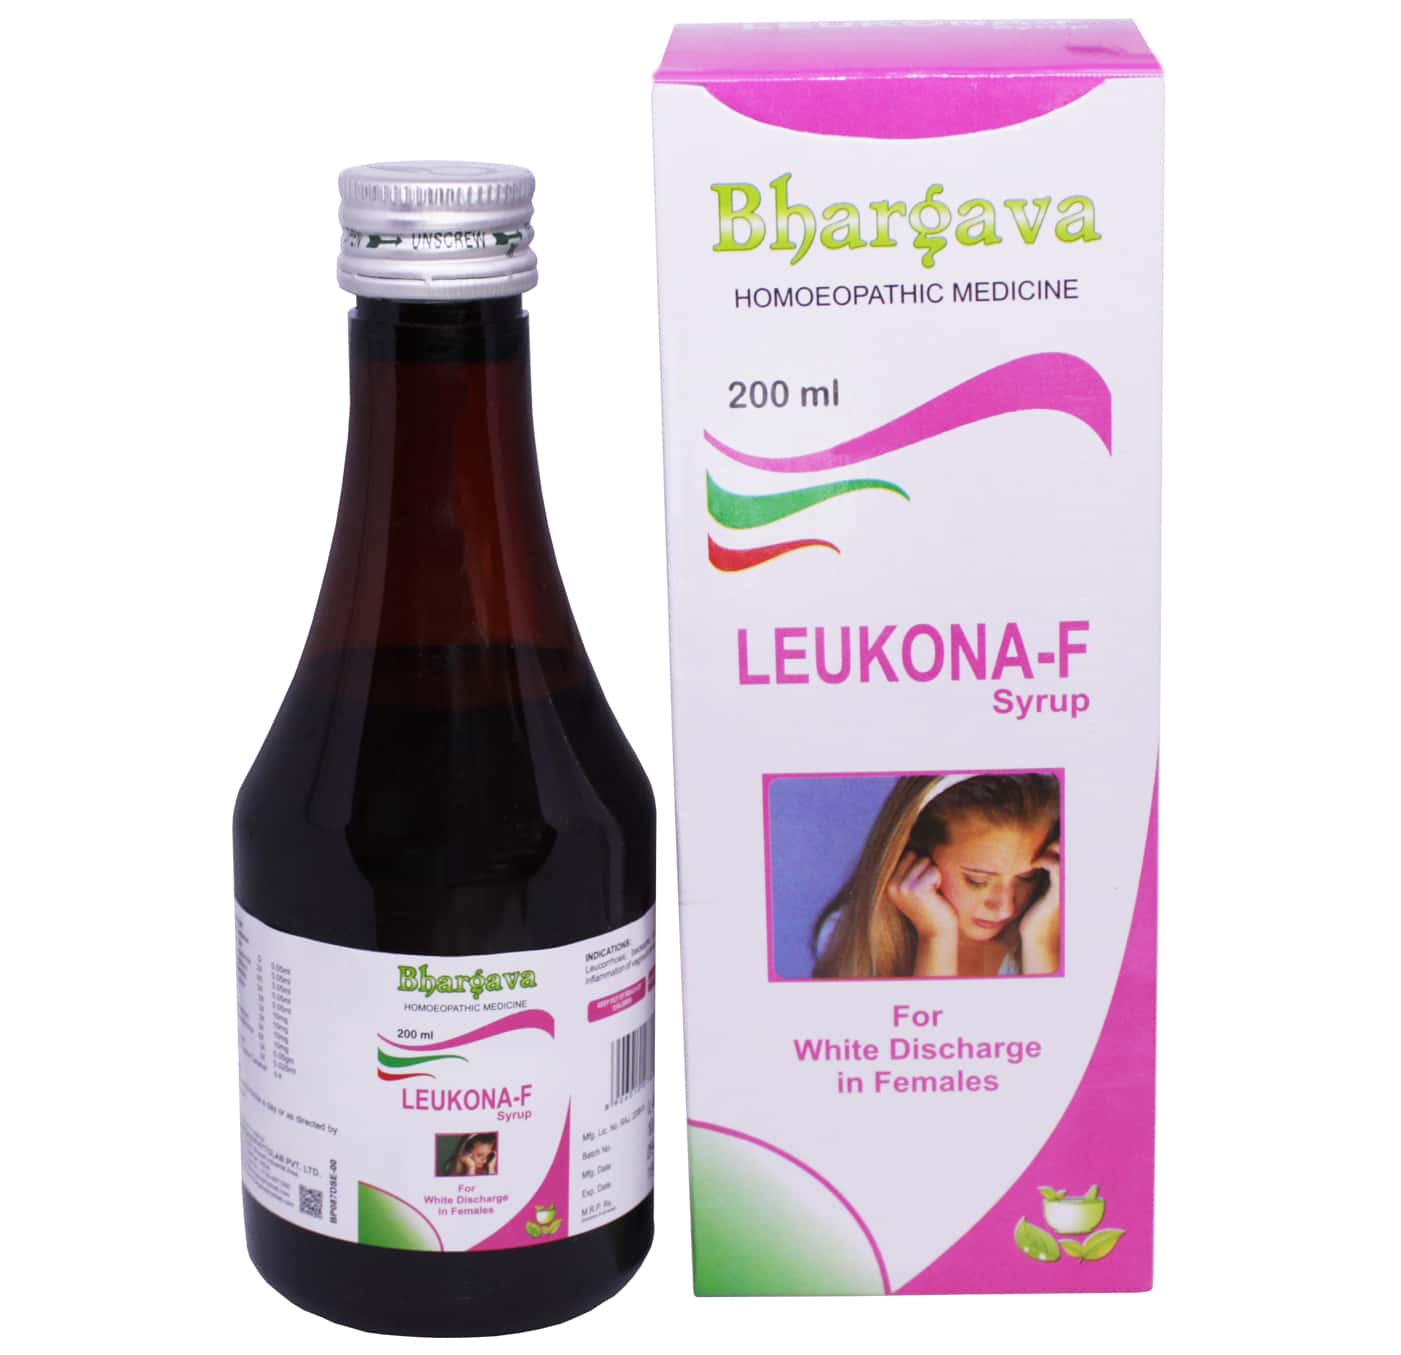 Leukona F Syrup Useful in White Discharges style=